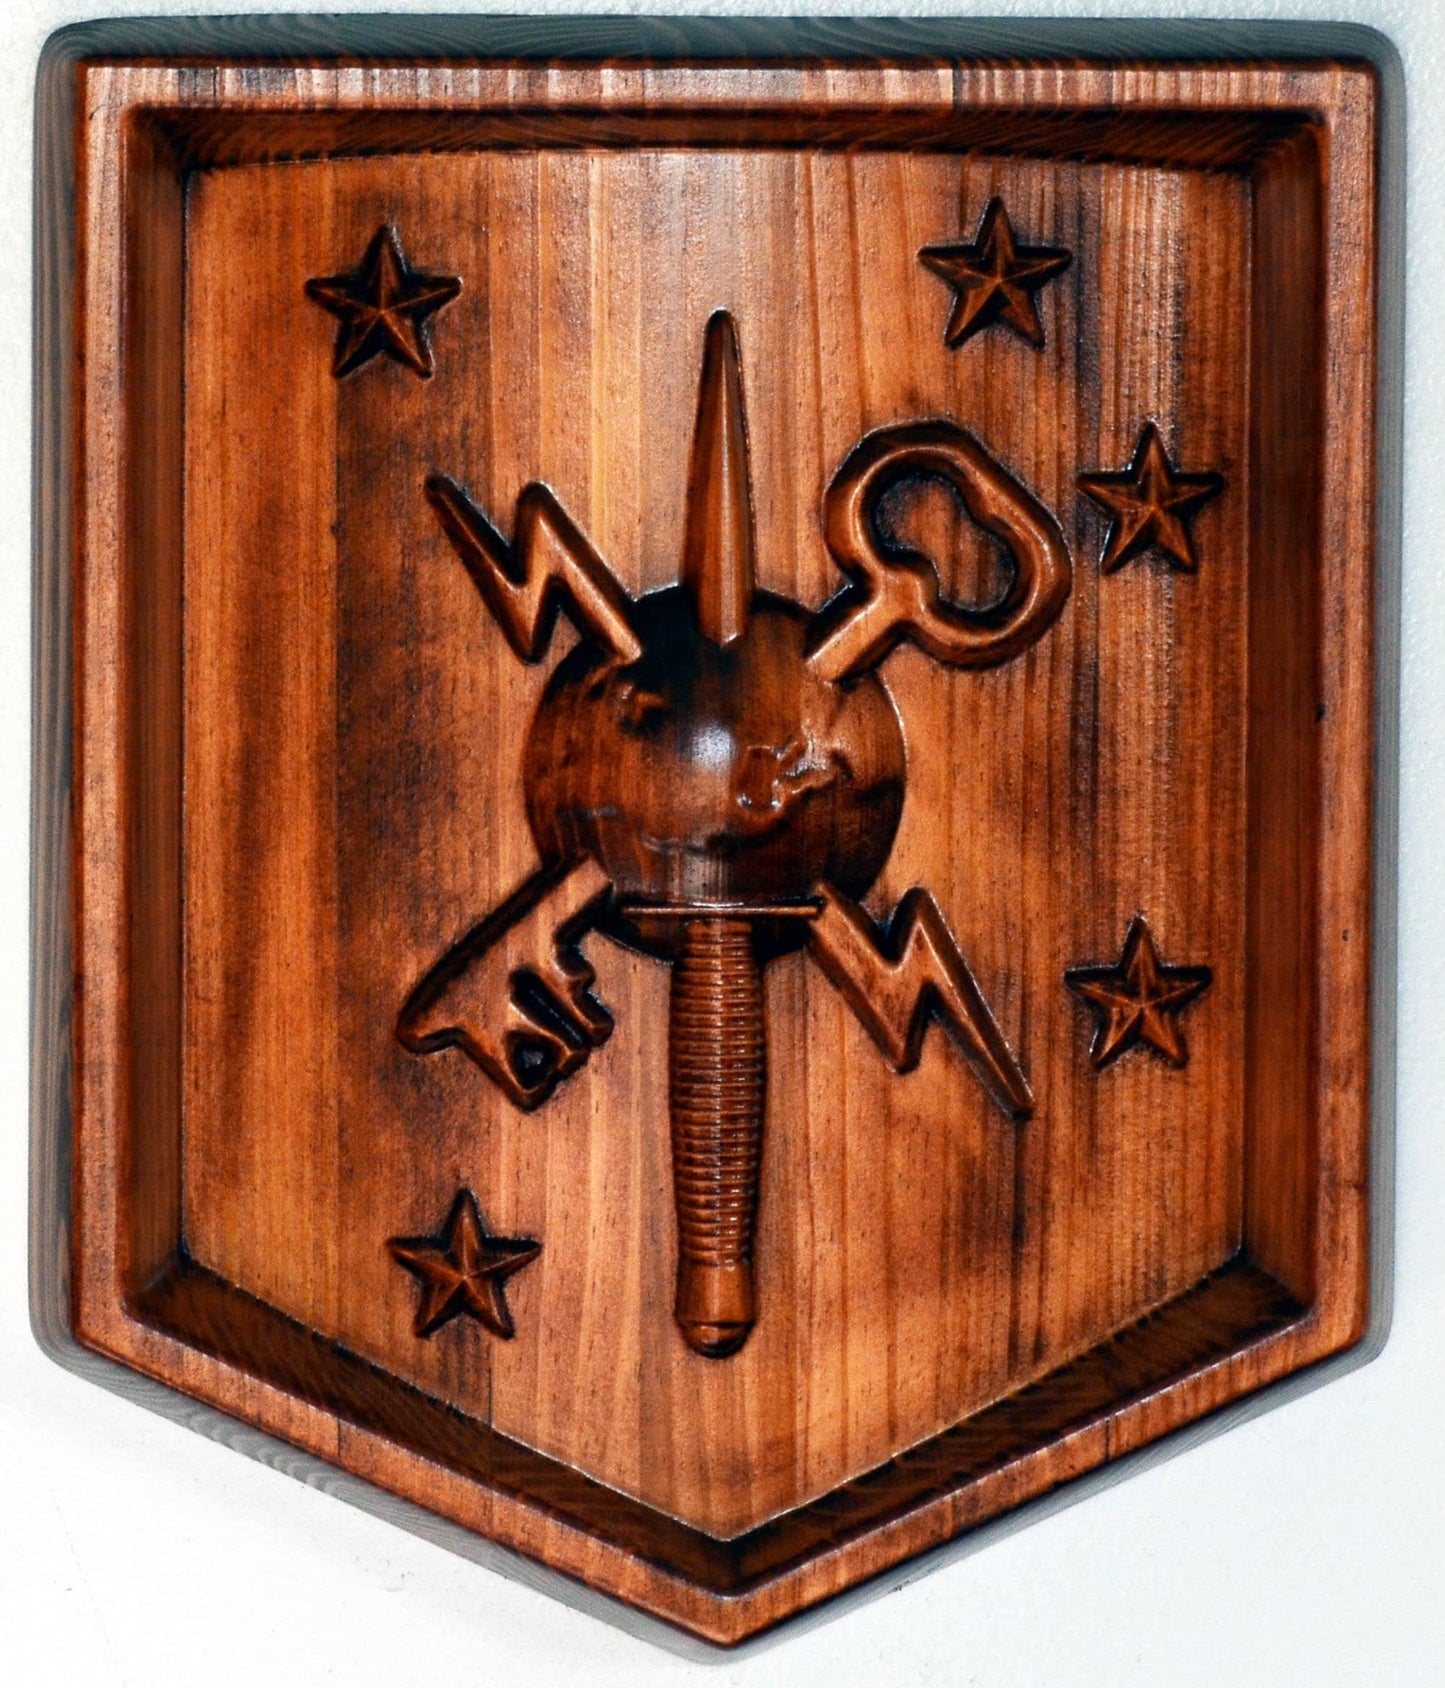 USMC Marine Special Operations Intelligence Battalion, MSOIB, stained 3d wood carving, military plaque